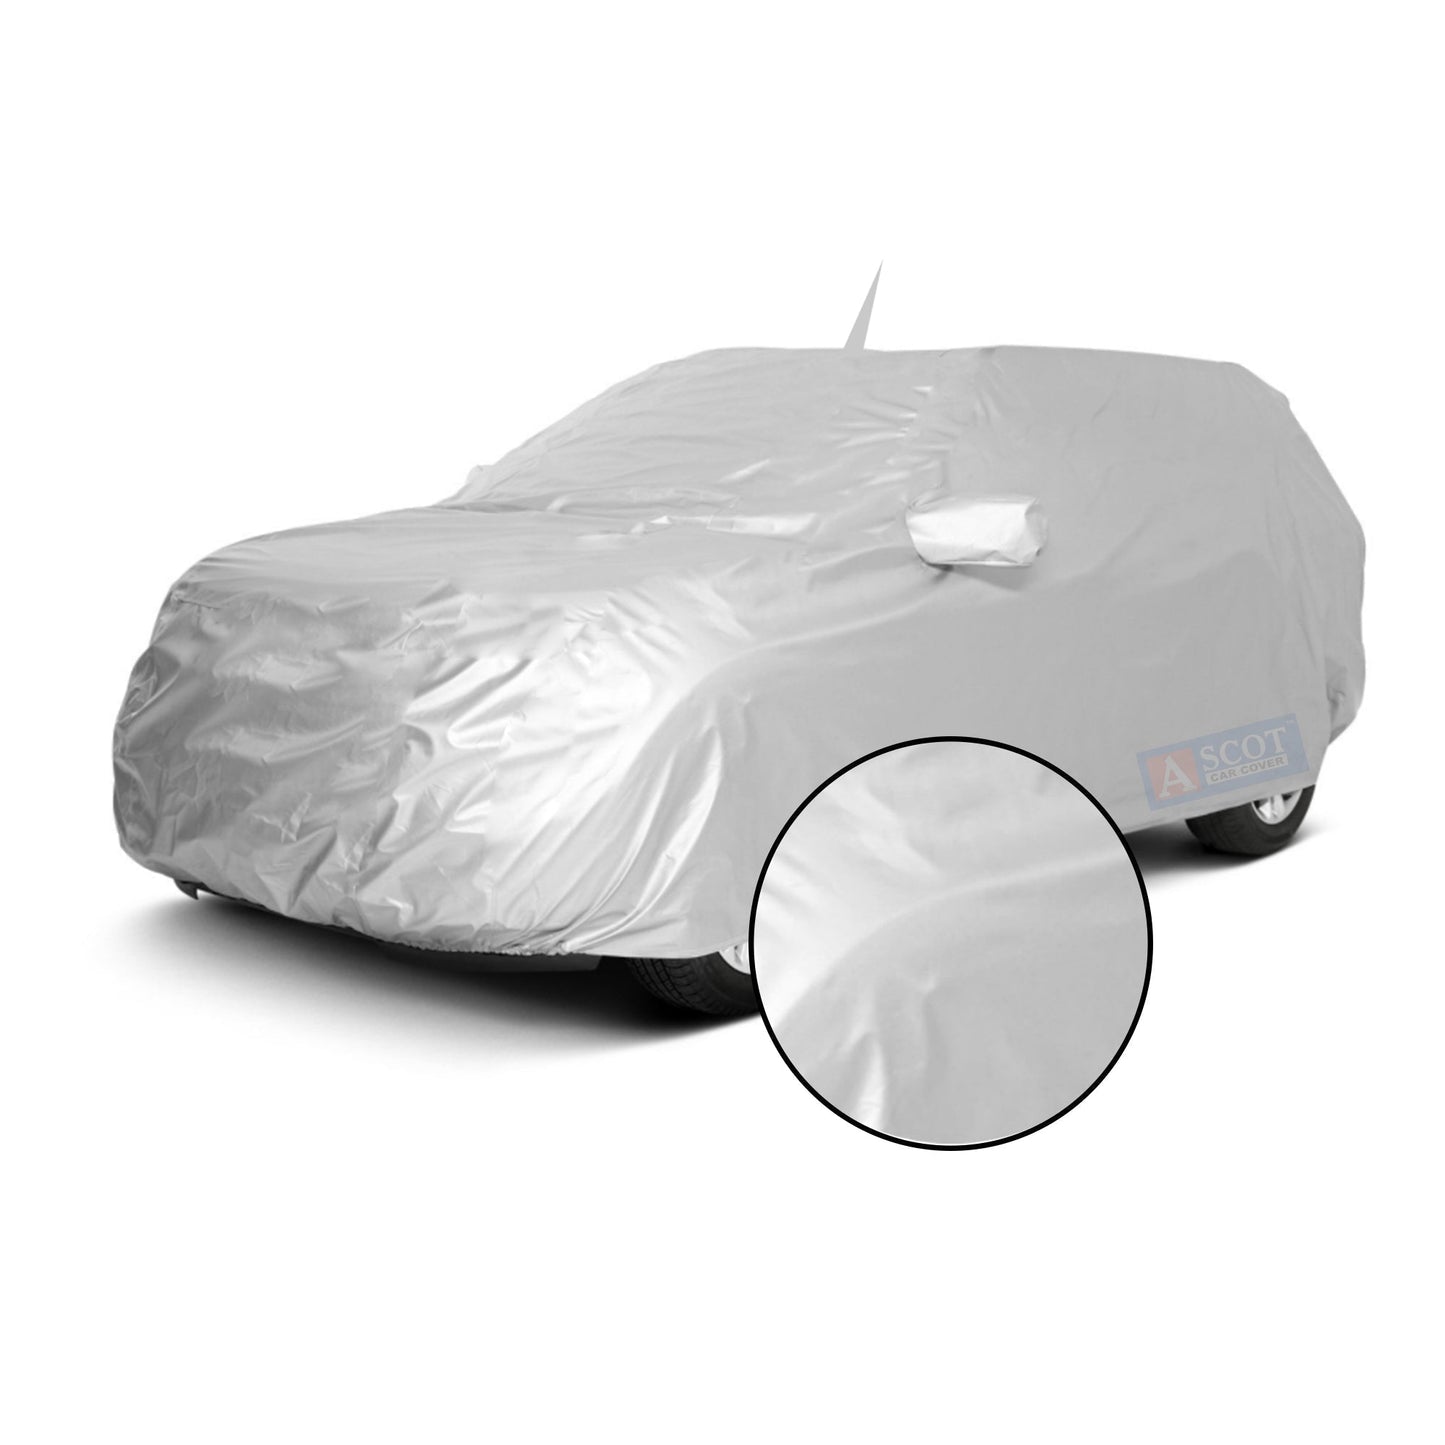 Ascot Chevrolet Enjoy Car Body Cover Dust Proof, Trippel Stitched